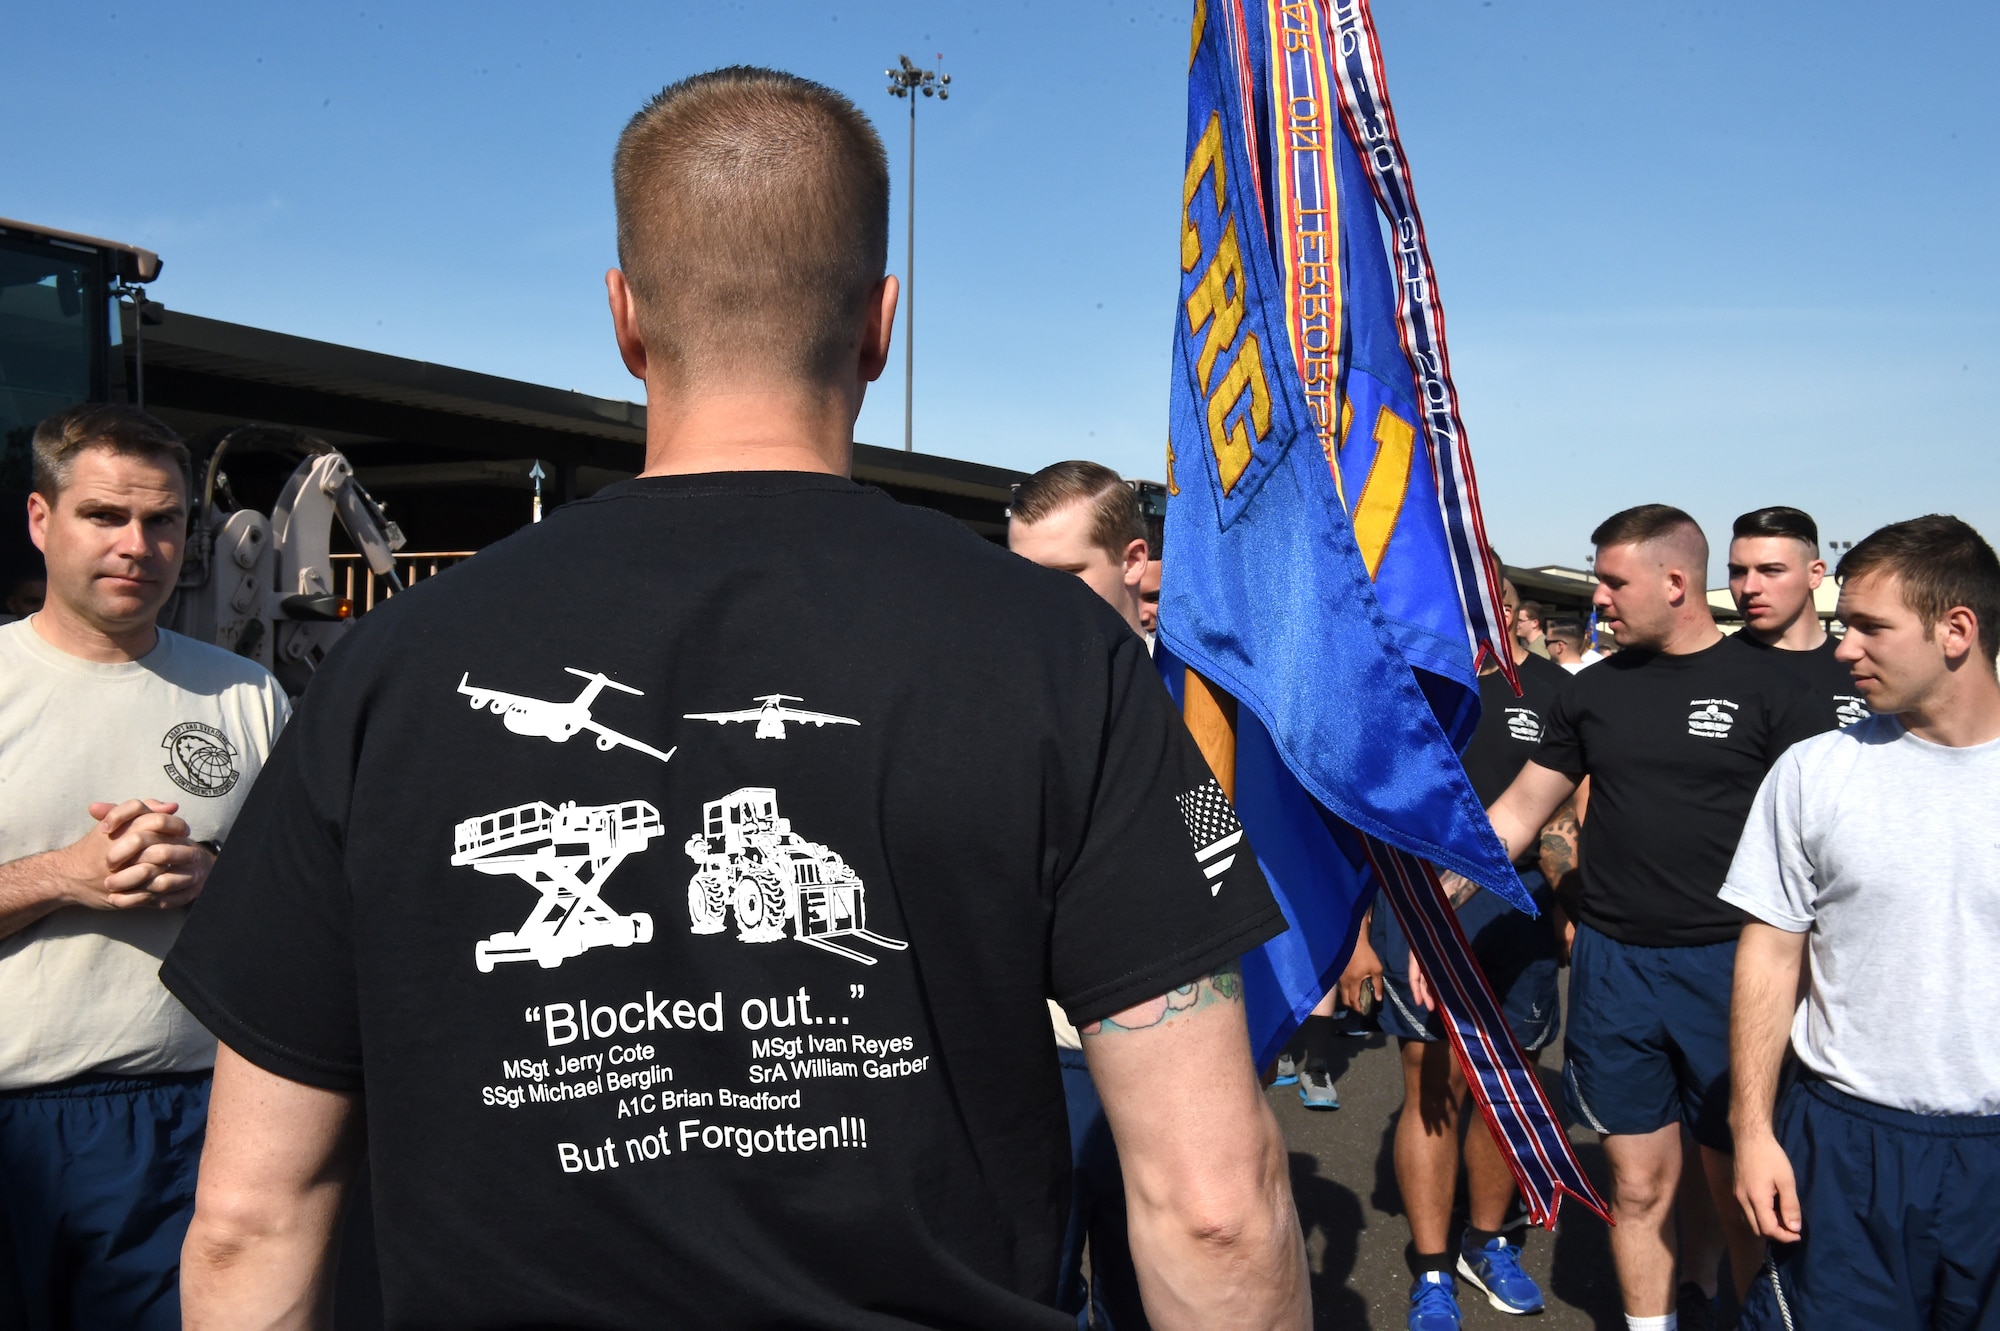 A Port Dawg Memorial Run shirt displays the names of the fallen at Joint Base McGuire-Dix-Lakehurst, N.J. May 17, 2019. The Port Dawg Memorial Run honors aerial porters who lost their lives the previous year. (U.S. Air Force photo by Staff Sgt. Sarah Brice)